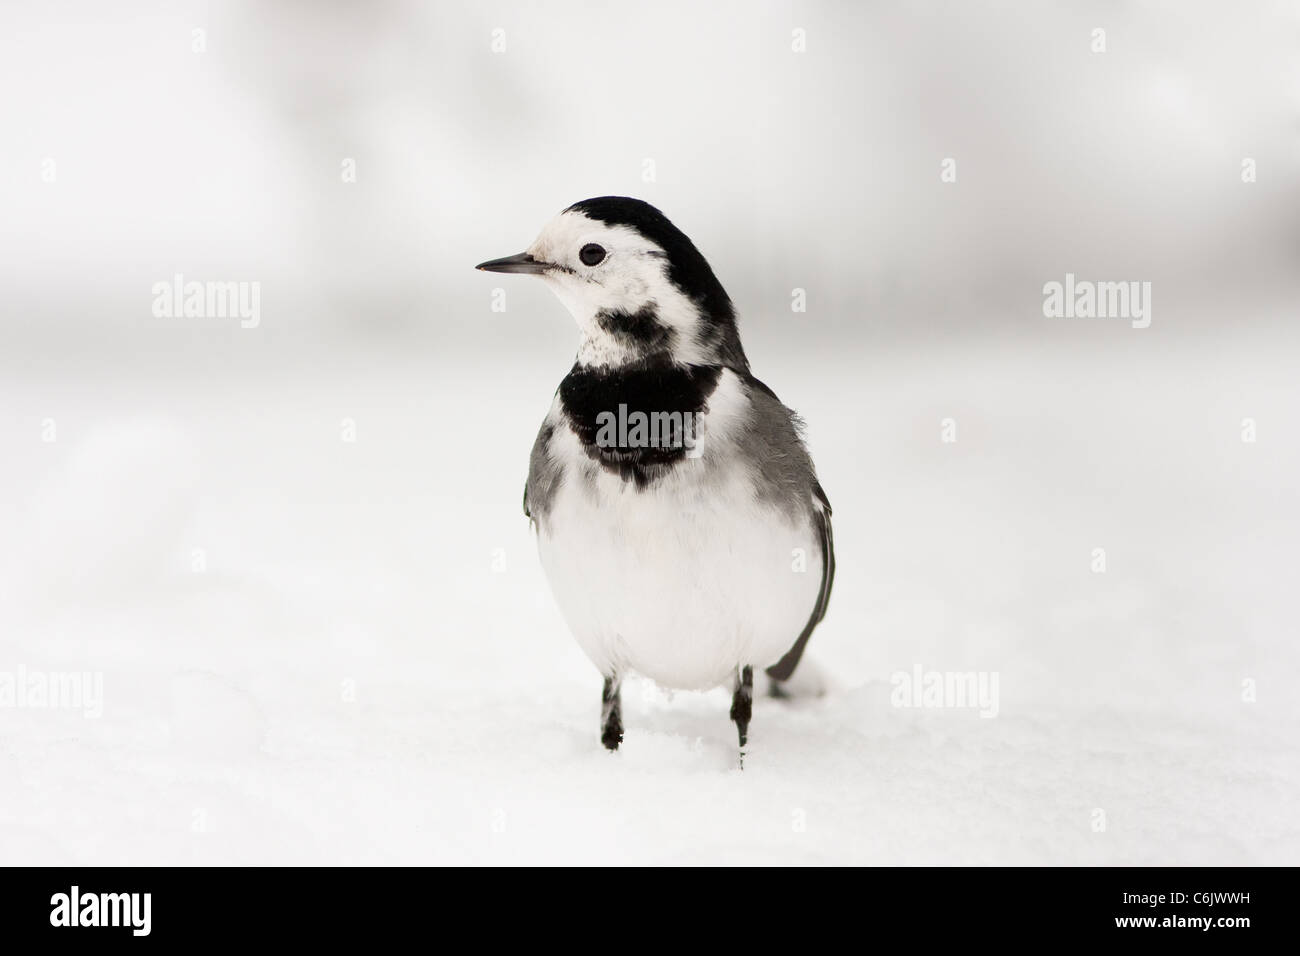 European Pied Wagtail in Winter Snow Stock Photo